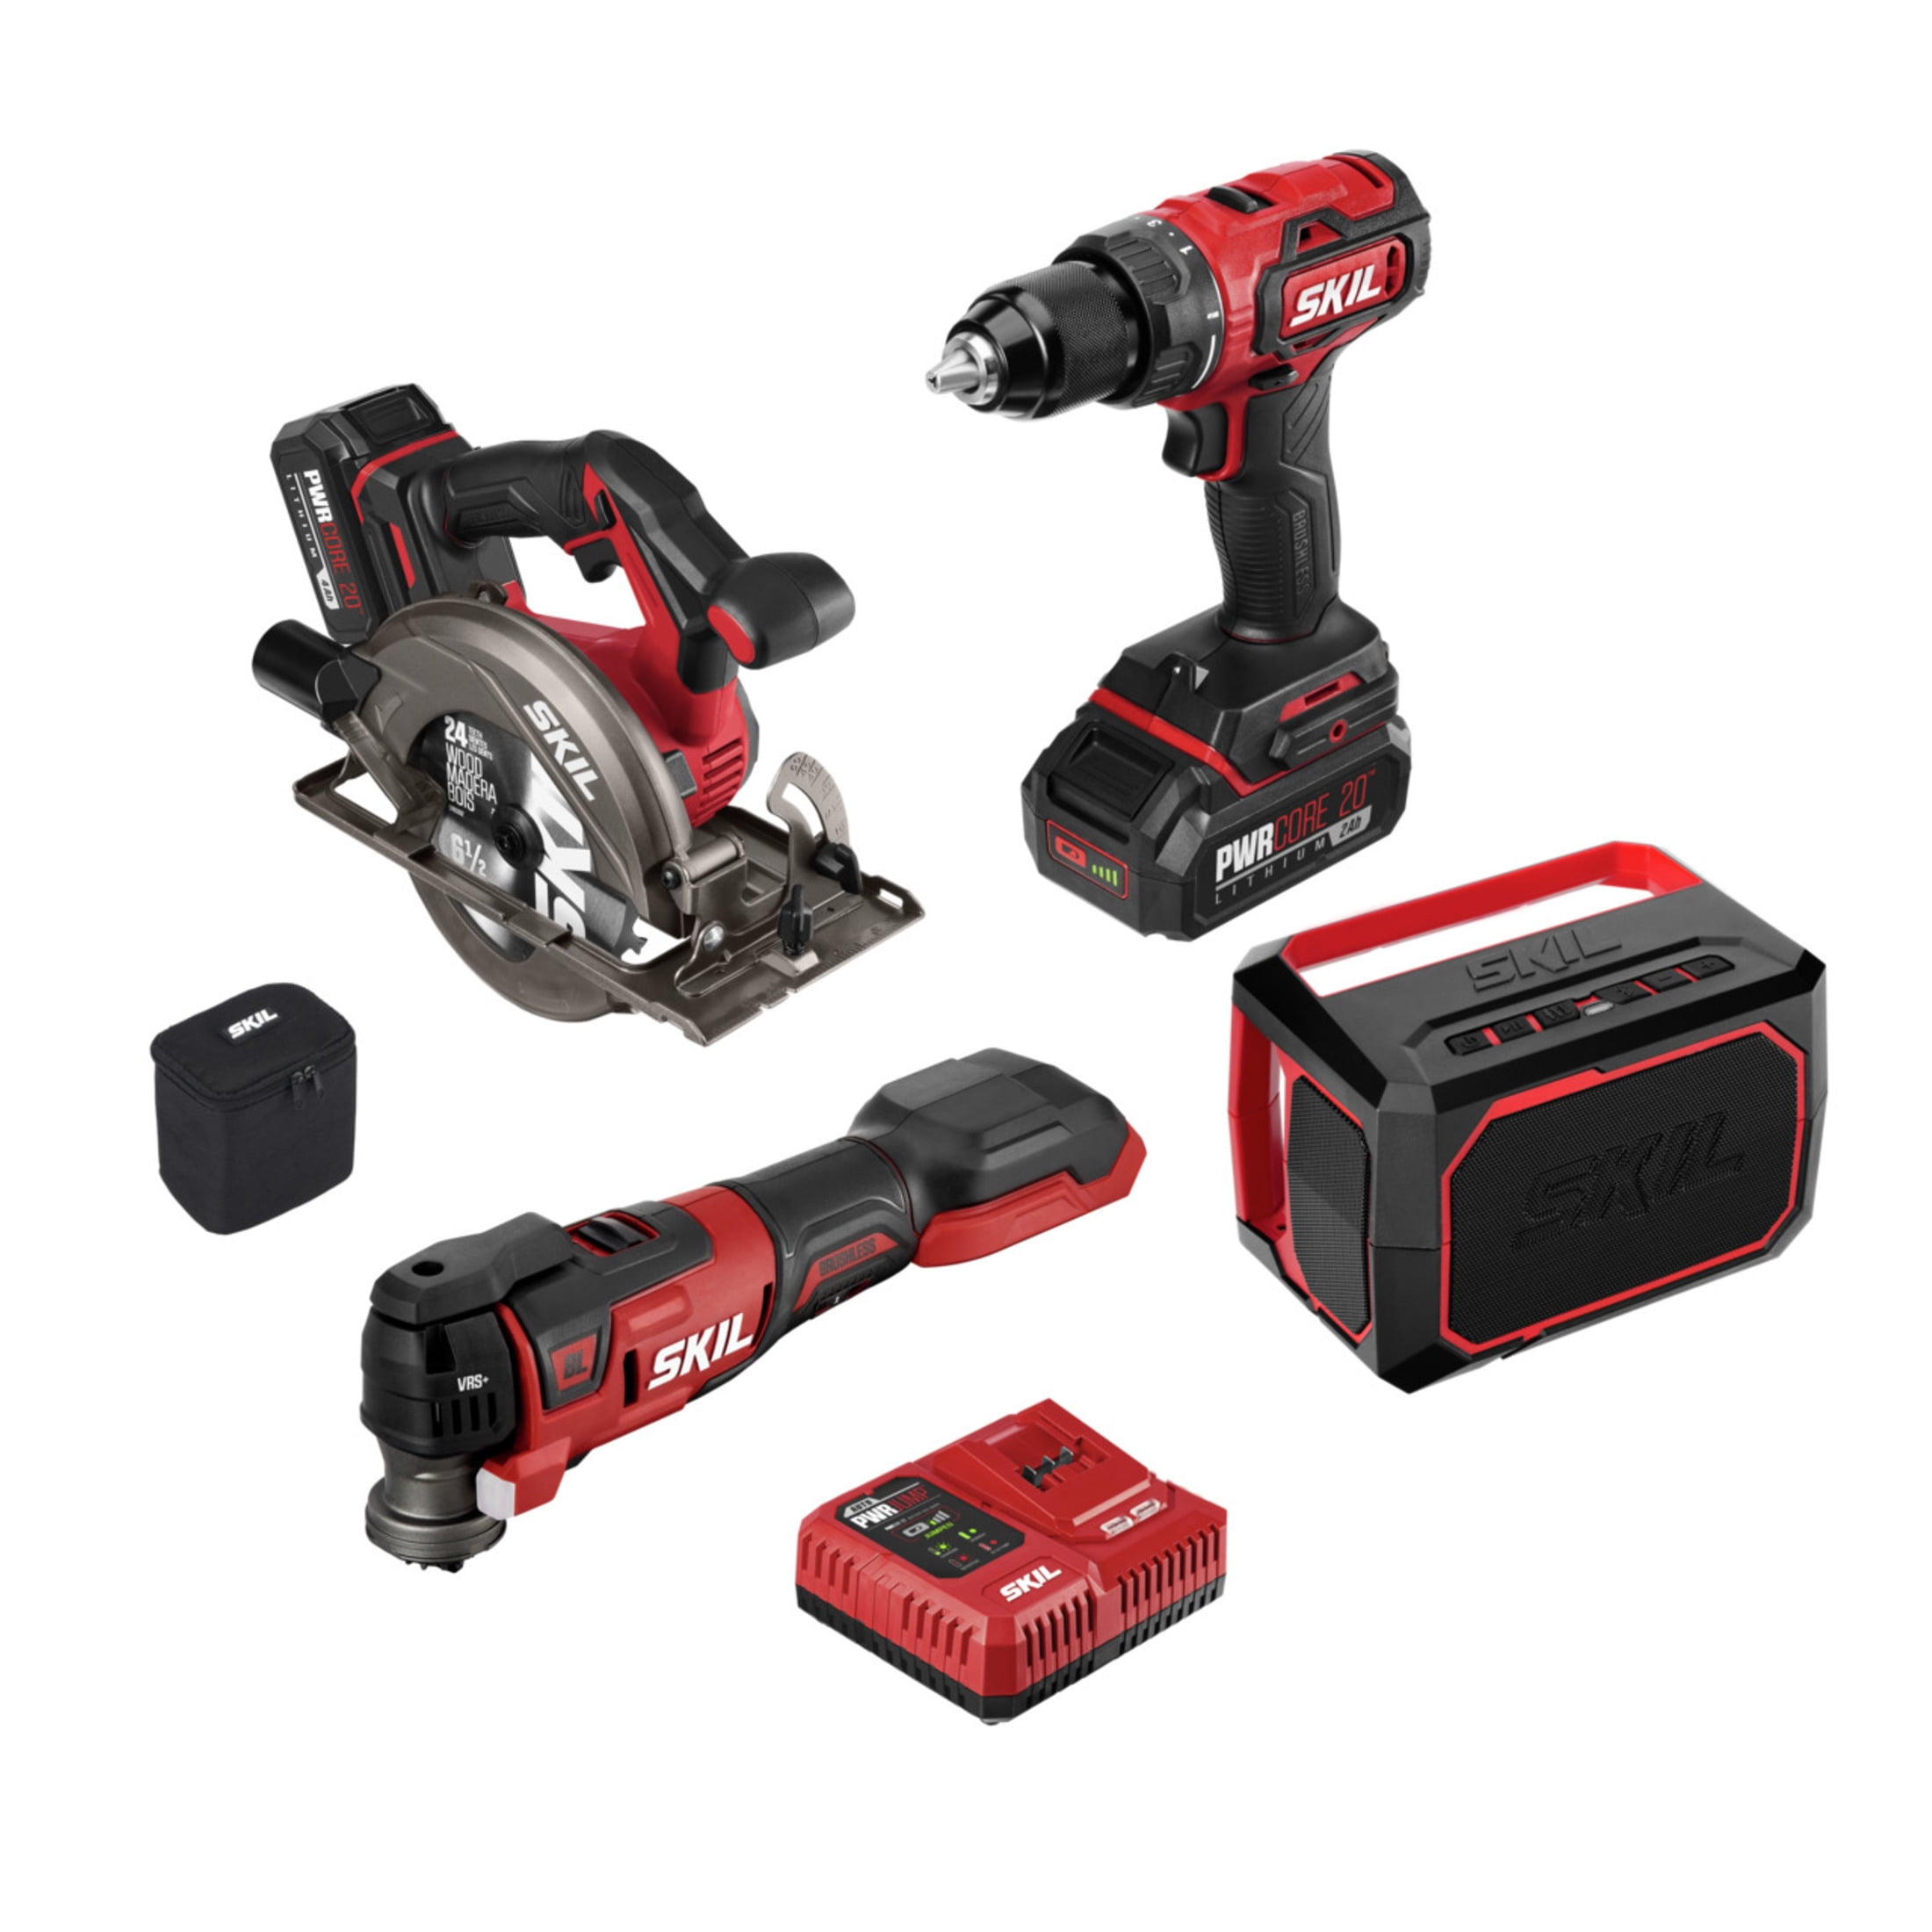 SKIL Cordless Brushless 20V 4-Tool Combo Kit: Drill Driver, Circular Saw, Multi-Tool & Bluetooth Speaker w/ 2.0Ah & 4.0Ah Lithium Battery & Charger $199 + Free Shipping